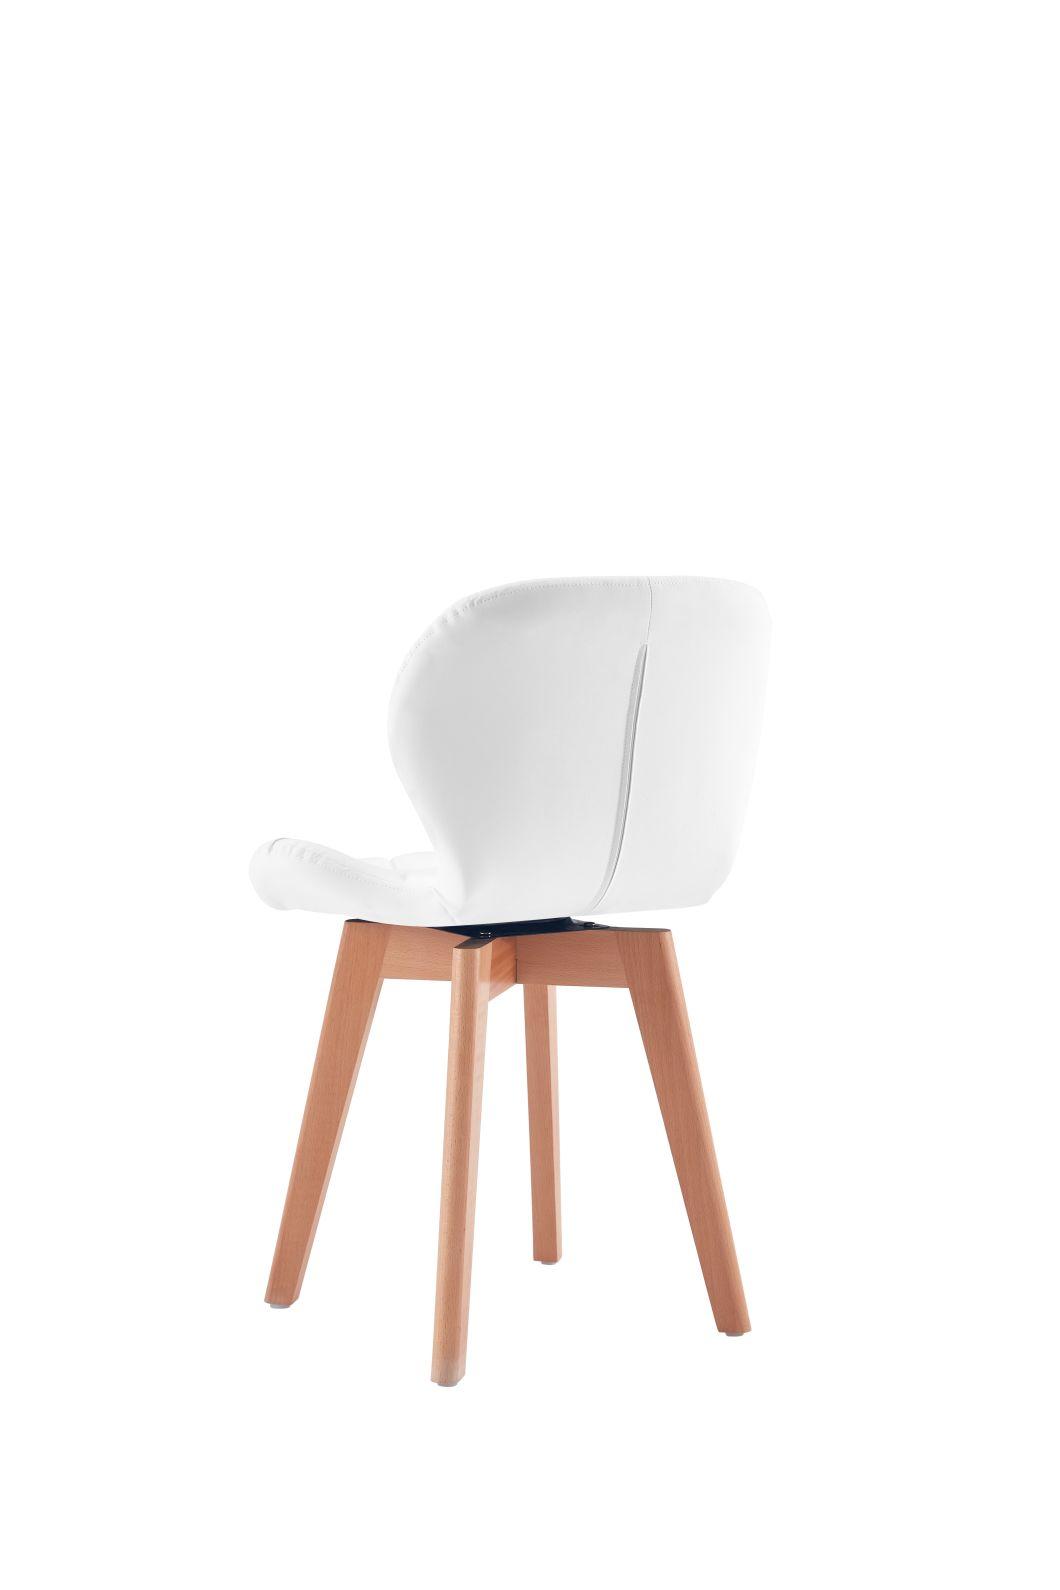 2021 Modern Design Cheap Home Furniture PU Leather Dining Room Chairs Beech Wood Legs Colorful Fabric Dining Chair